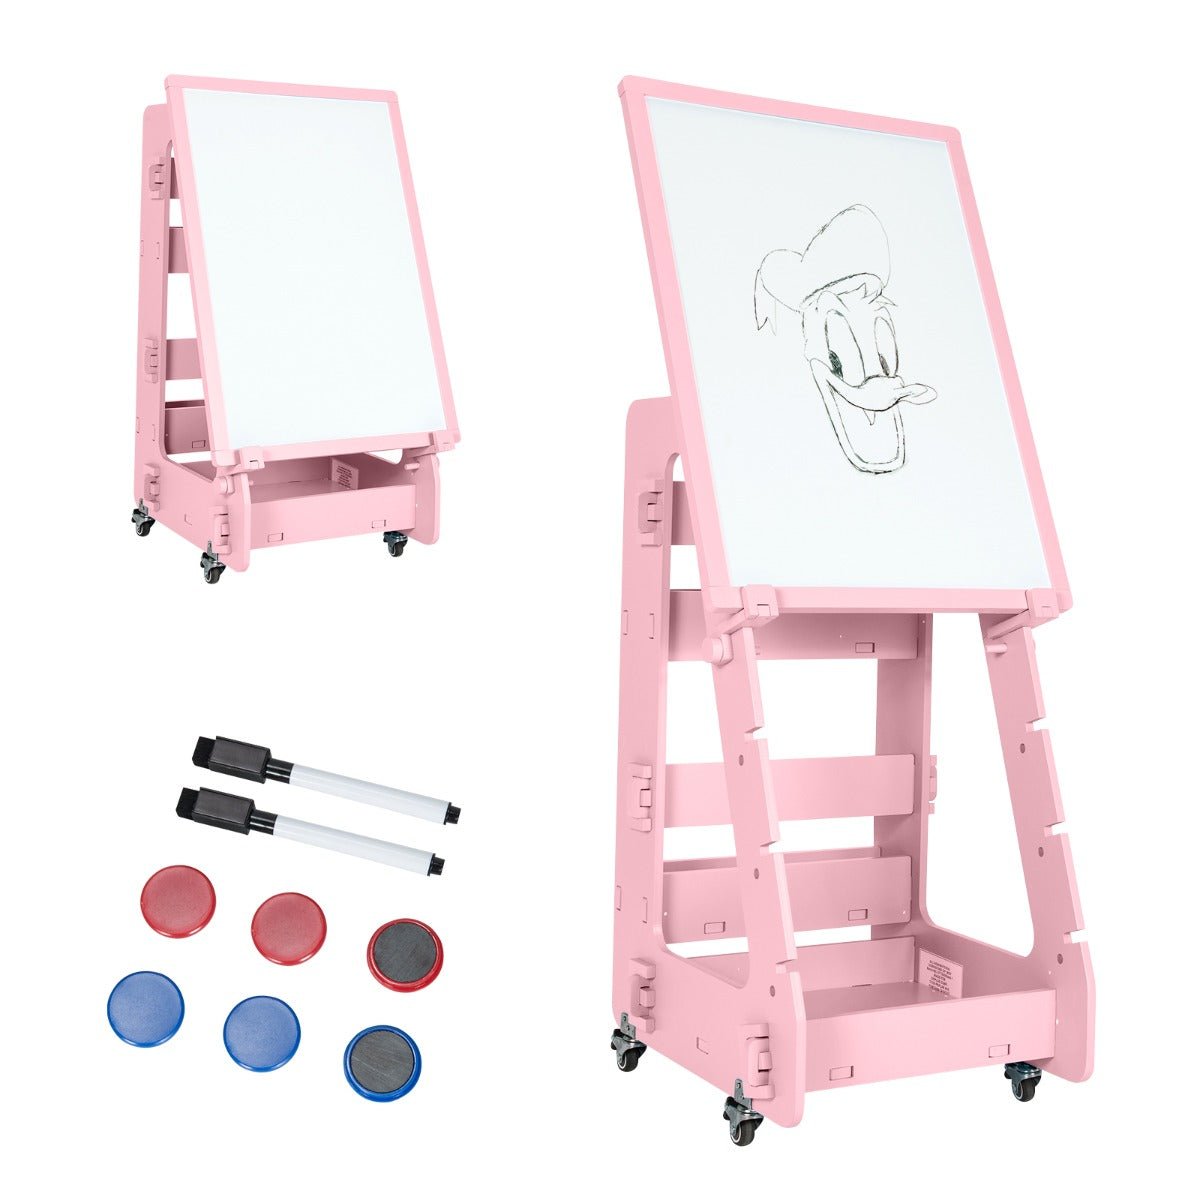 Multifunctional Pink Art Easel for Kids - Spark Imagination with Built-in Storage